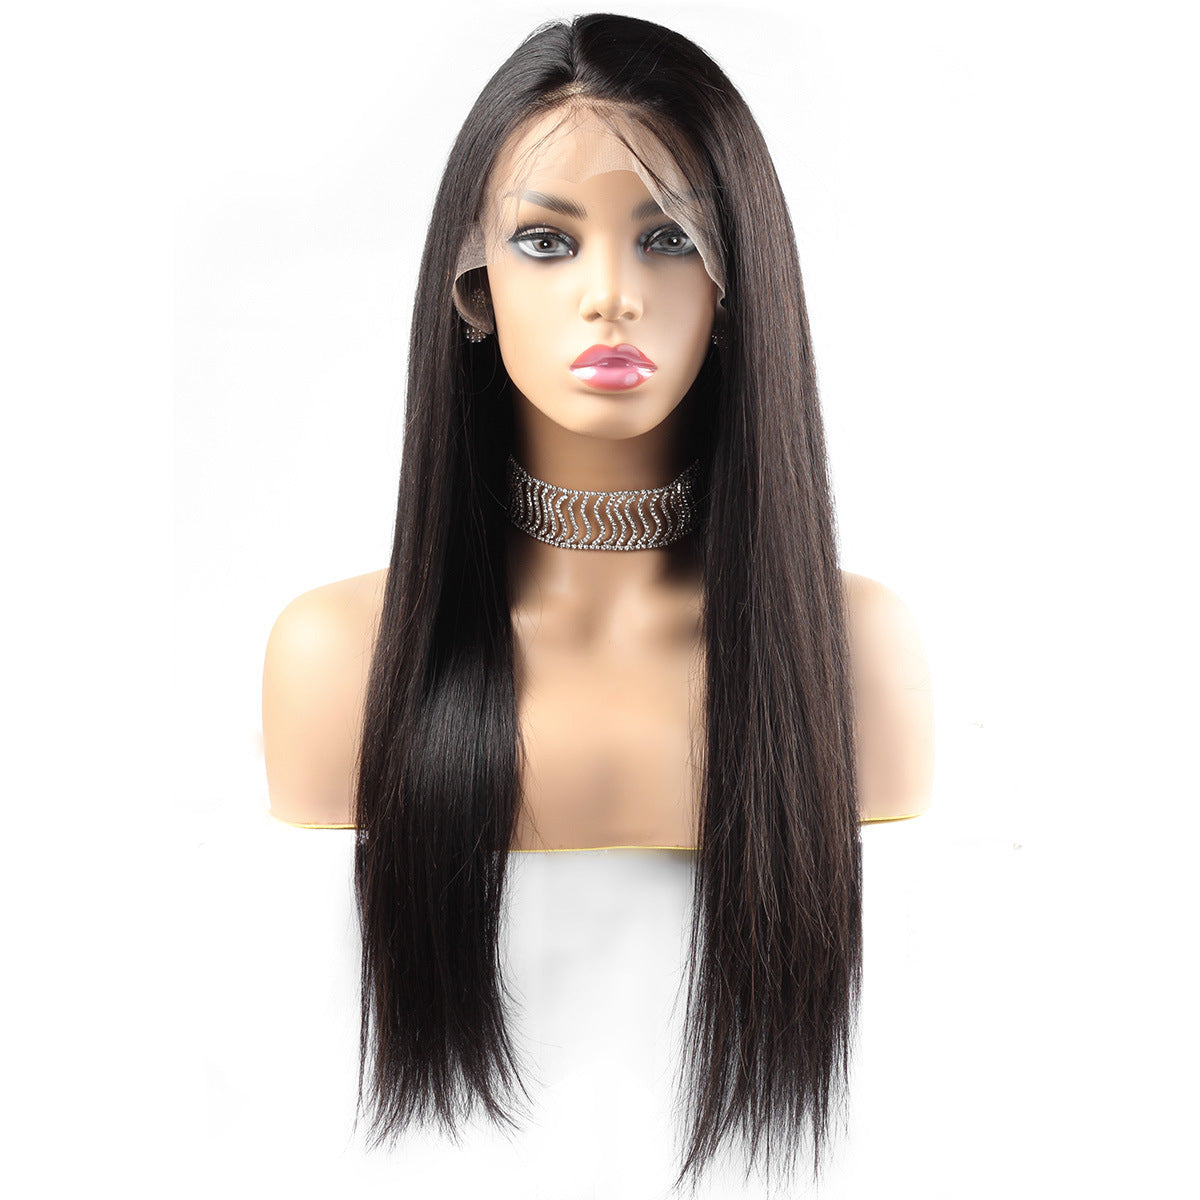 Front lace wig real human hair wigs straight headgear cross-border distribution